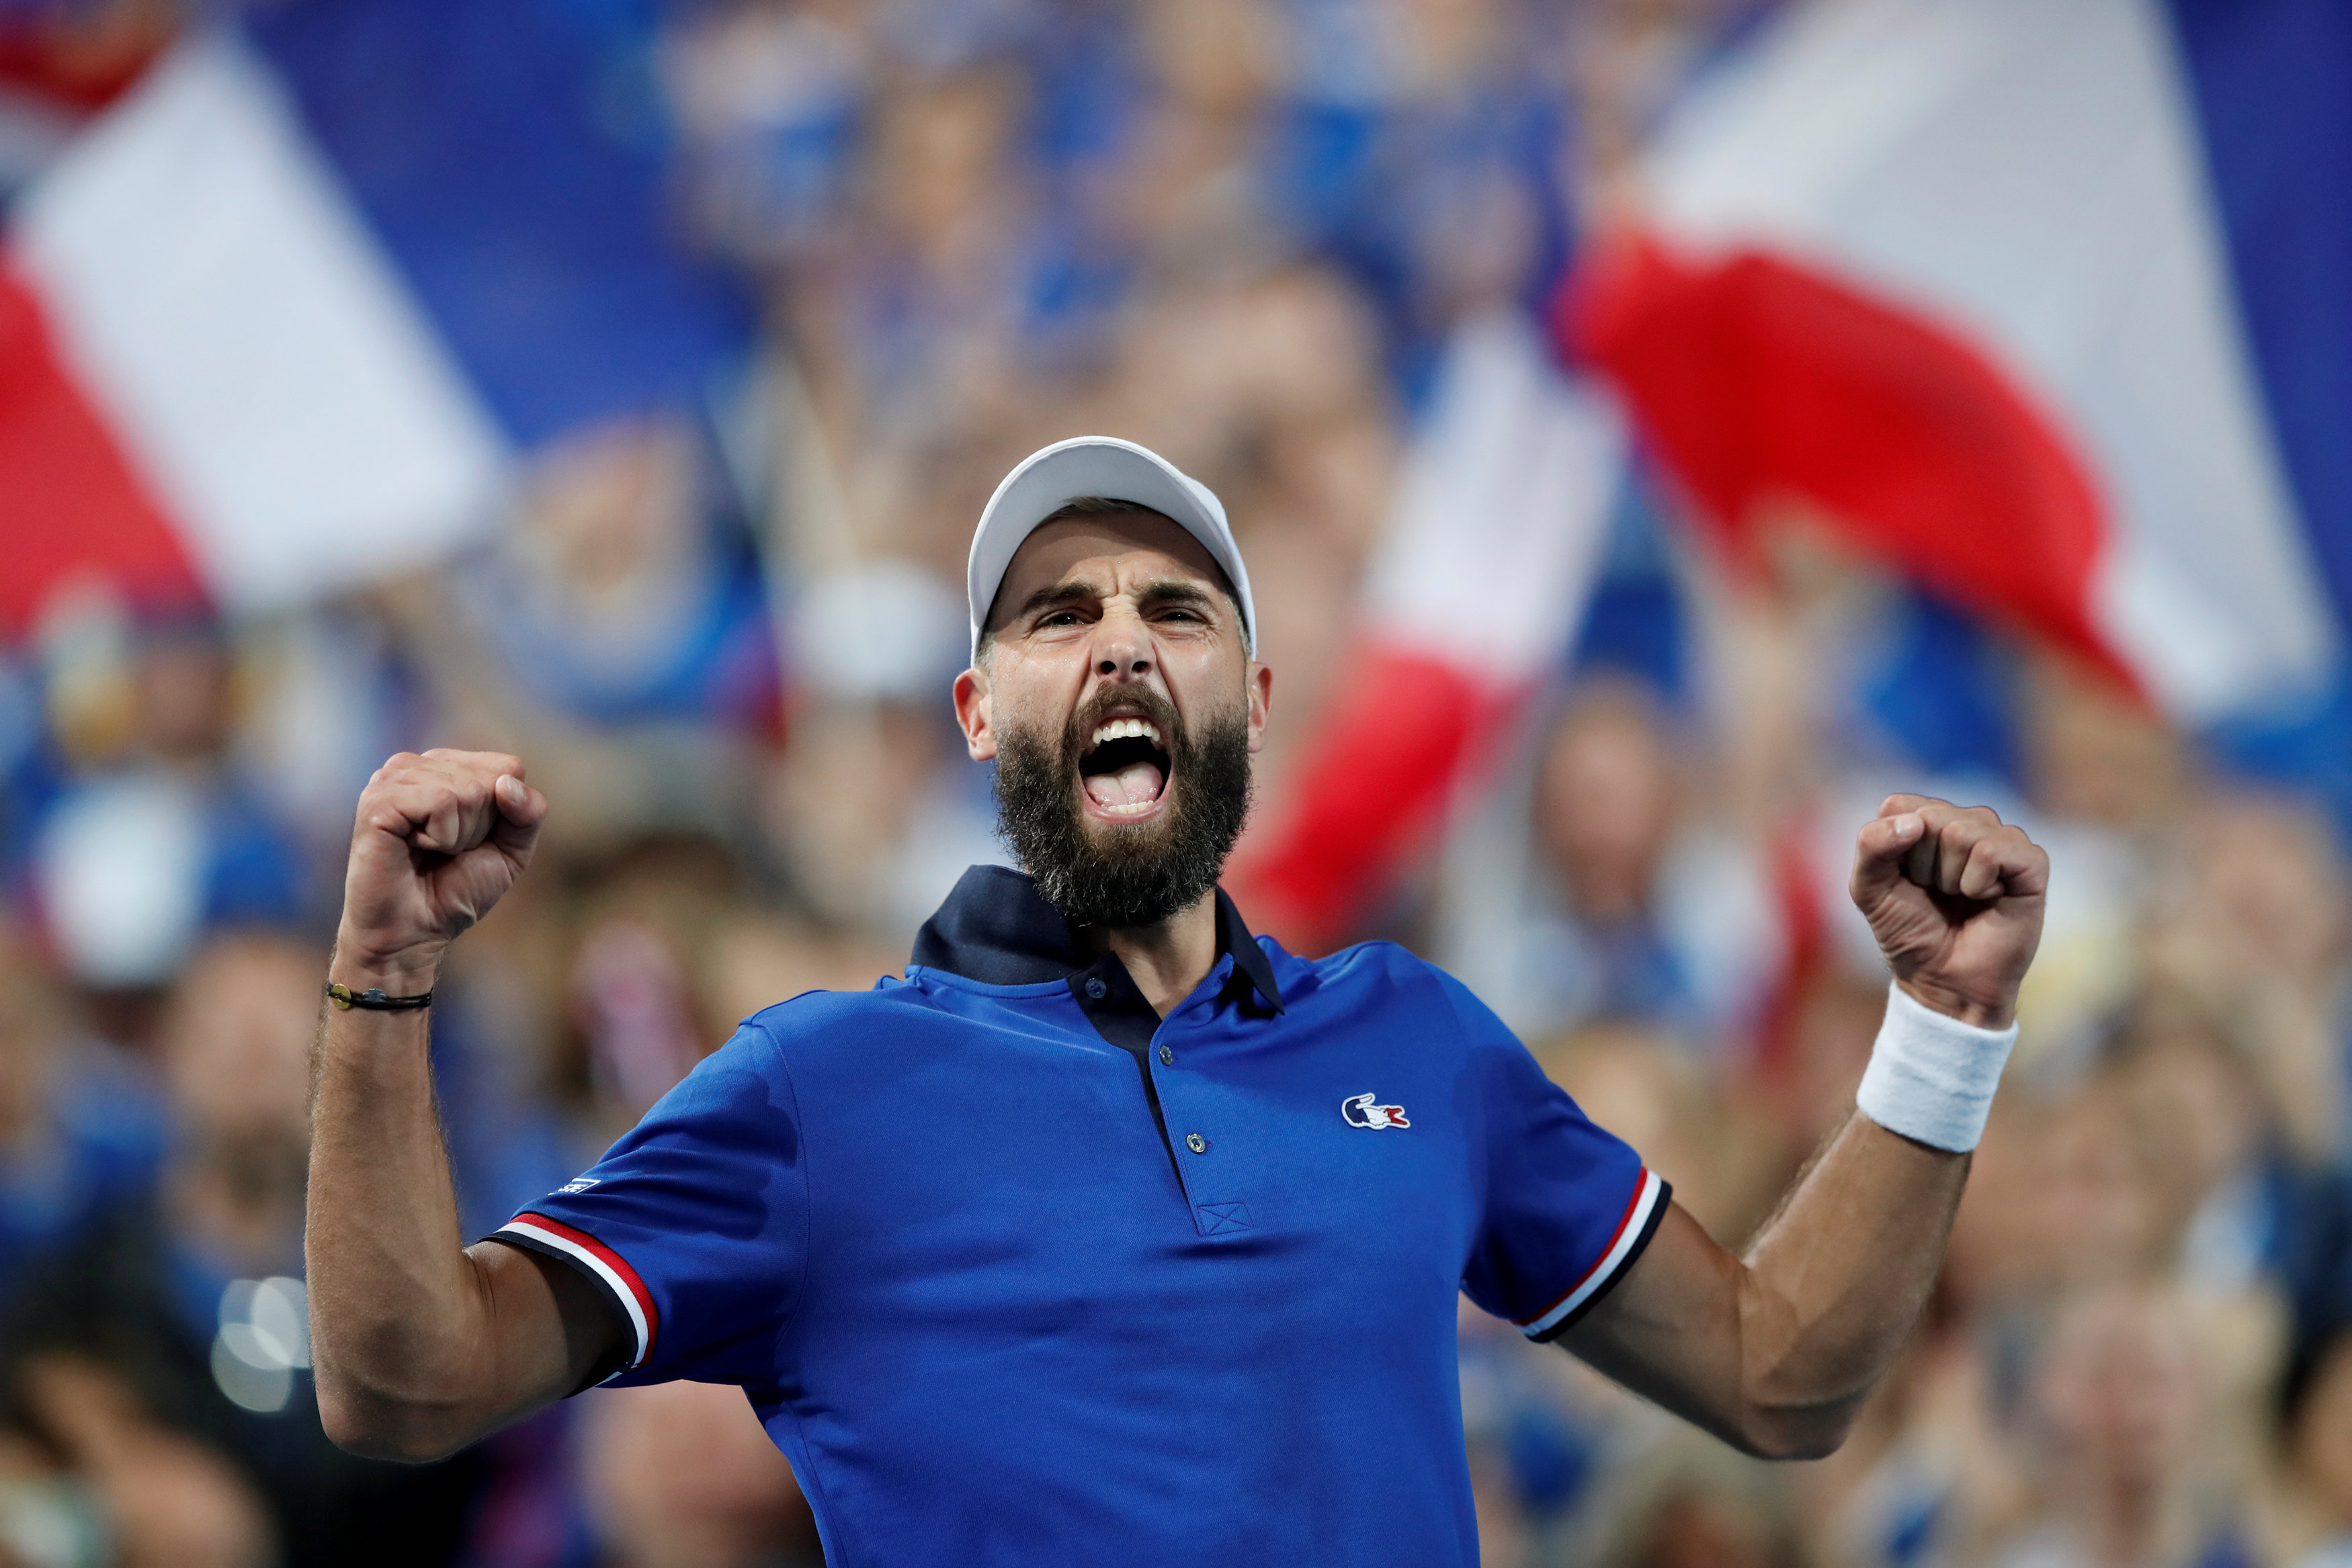 Tennis: Paire makes stunning Davis Cup debut as France lead Spain